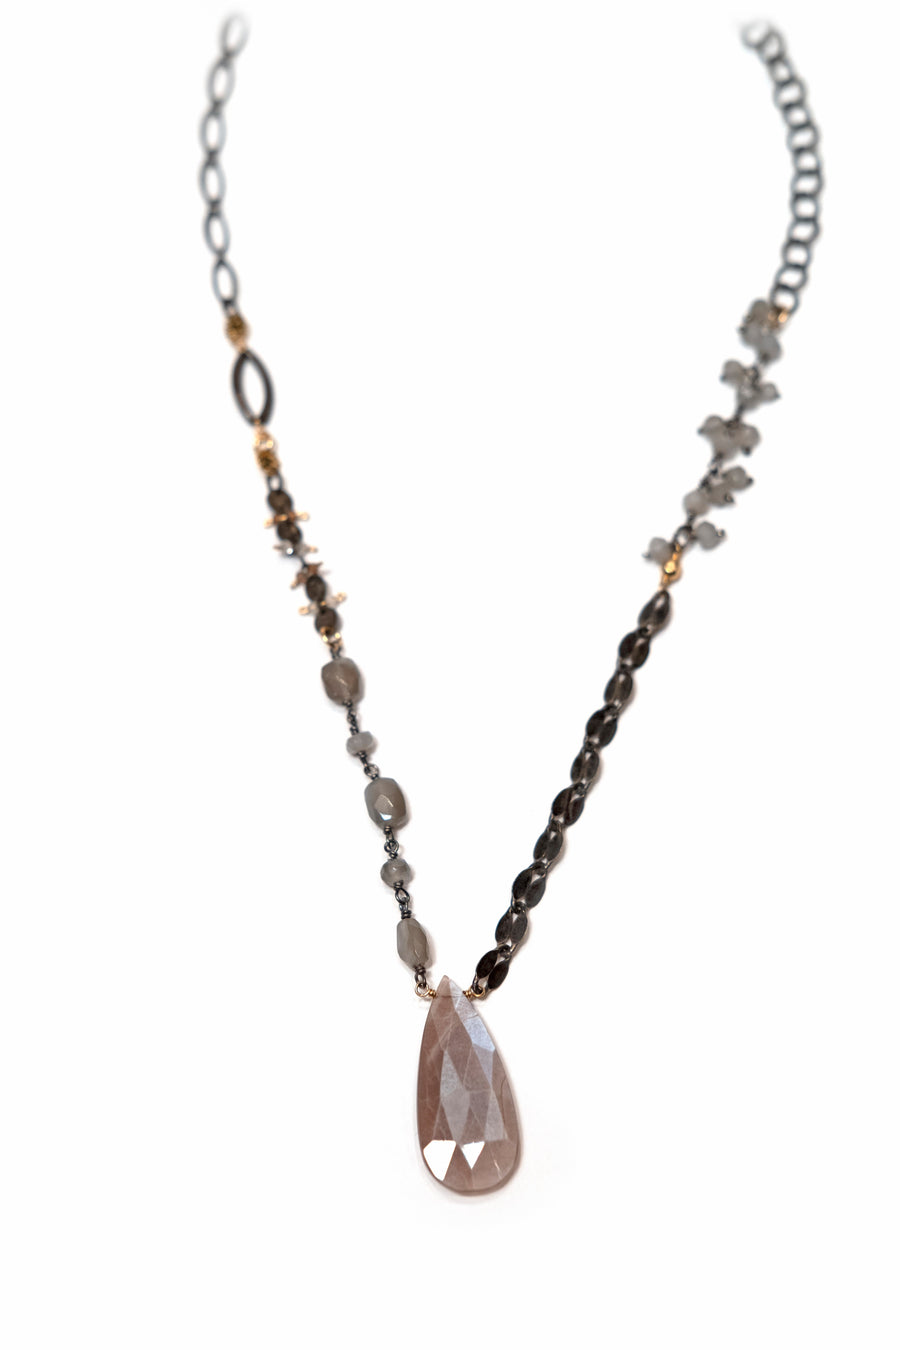 Chocolate Moonstone Pendant Necklace by Calliope